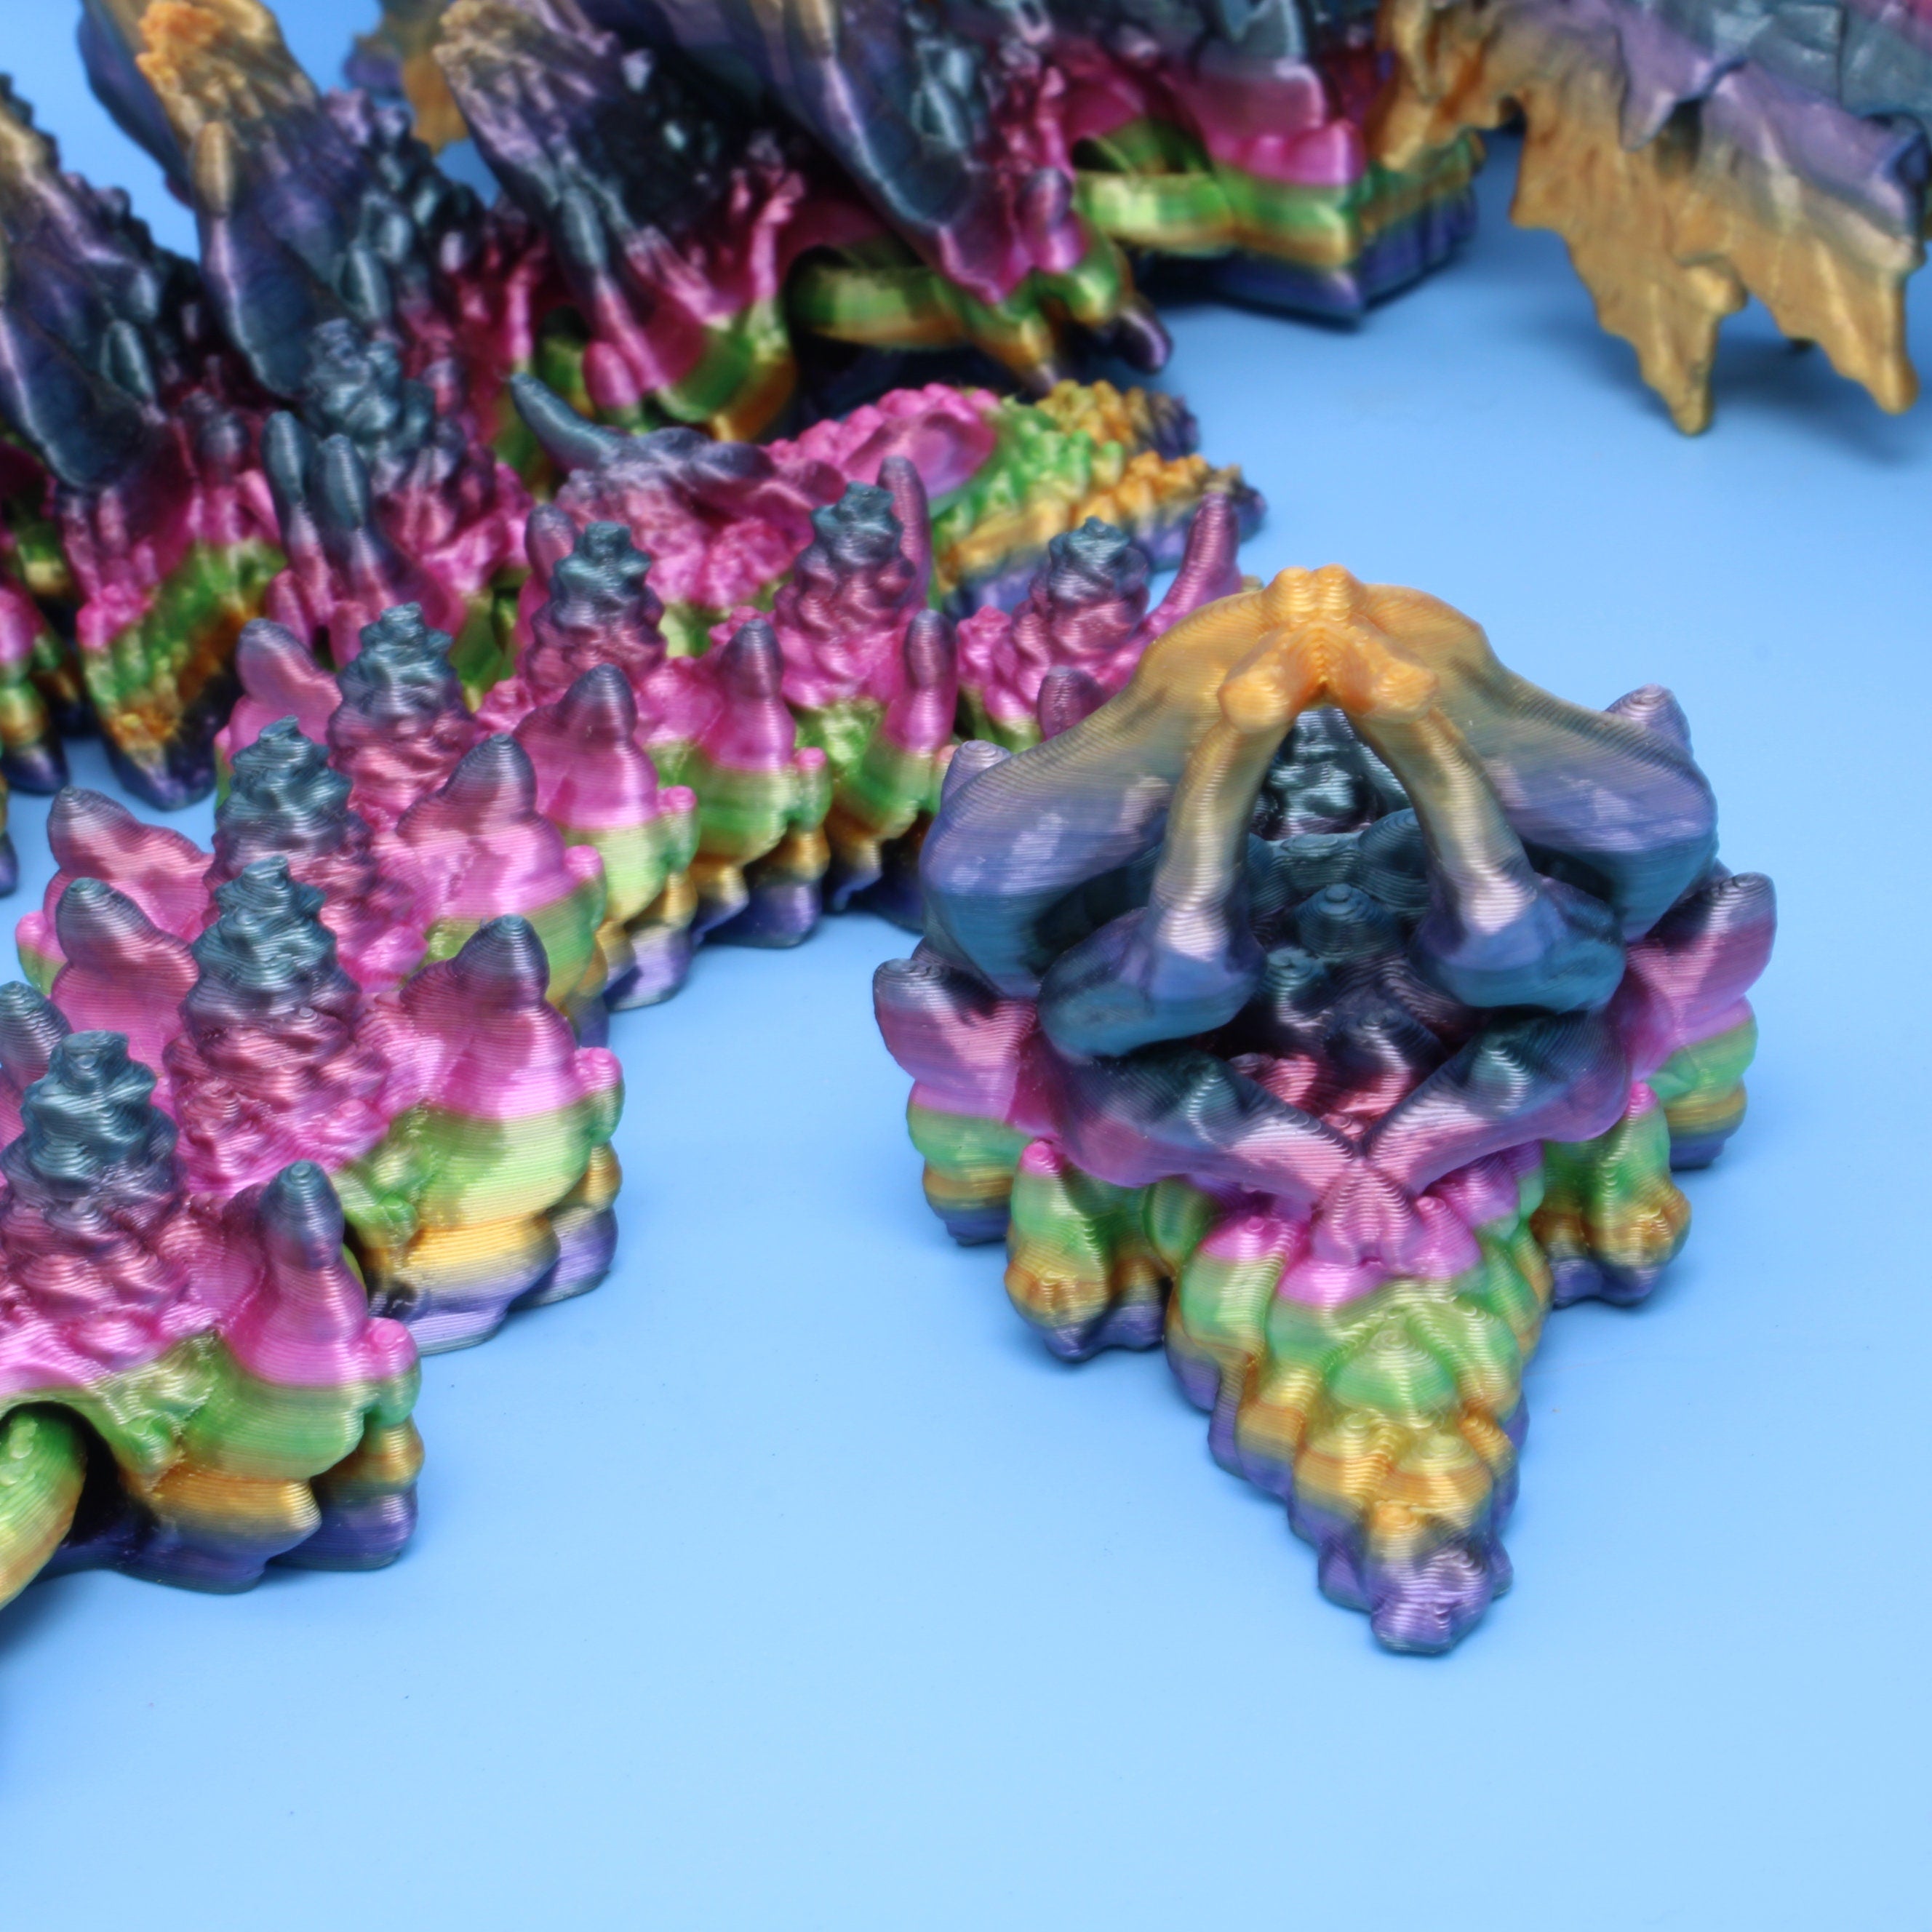 Autumn Wing Dragon | Rainbow | 3D printed | 19 in.